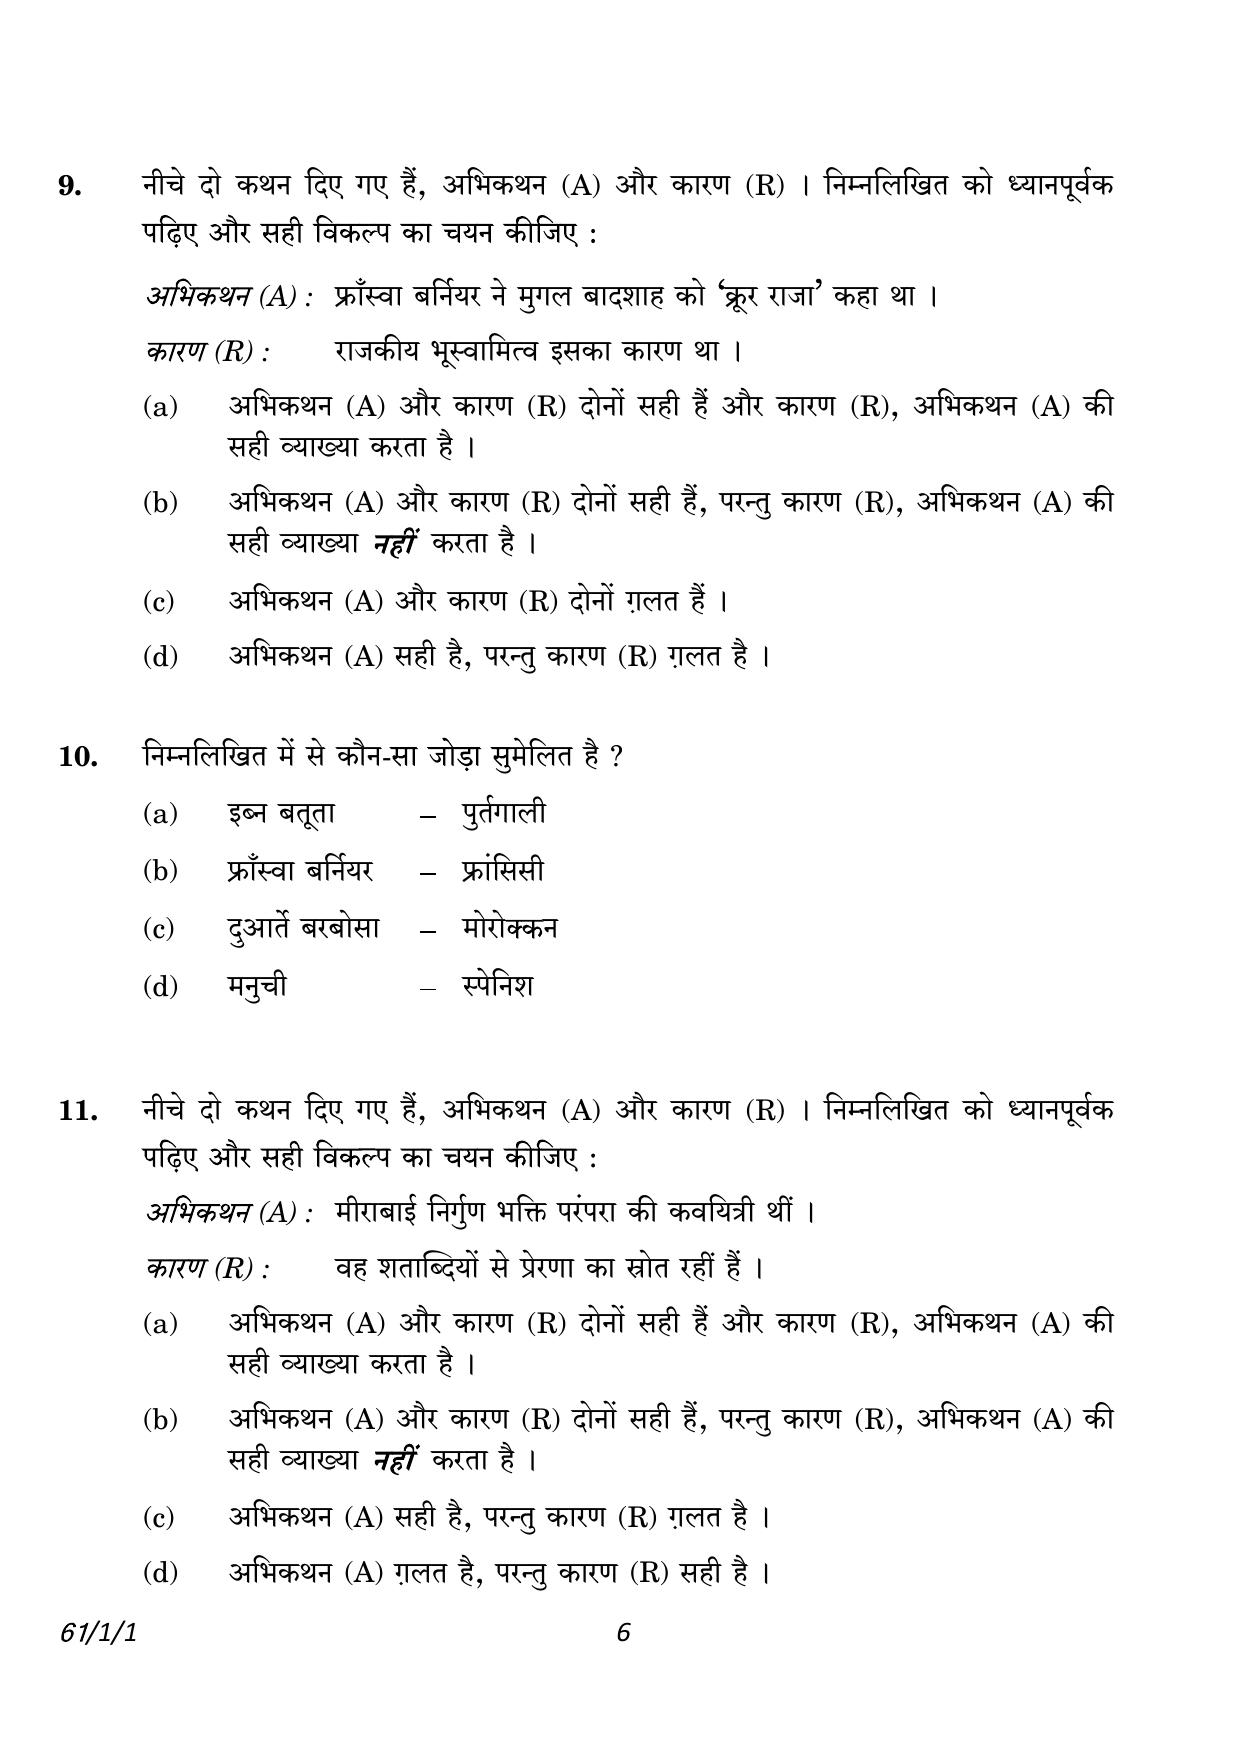 CBSE Class 12 61-1-1 History 2023 Question Paper - Page 6